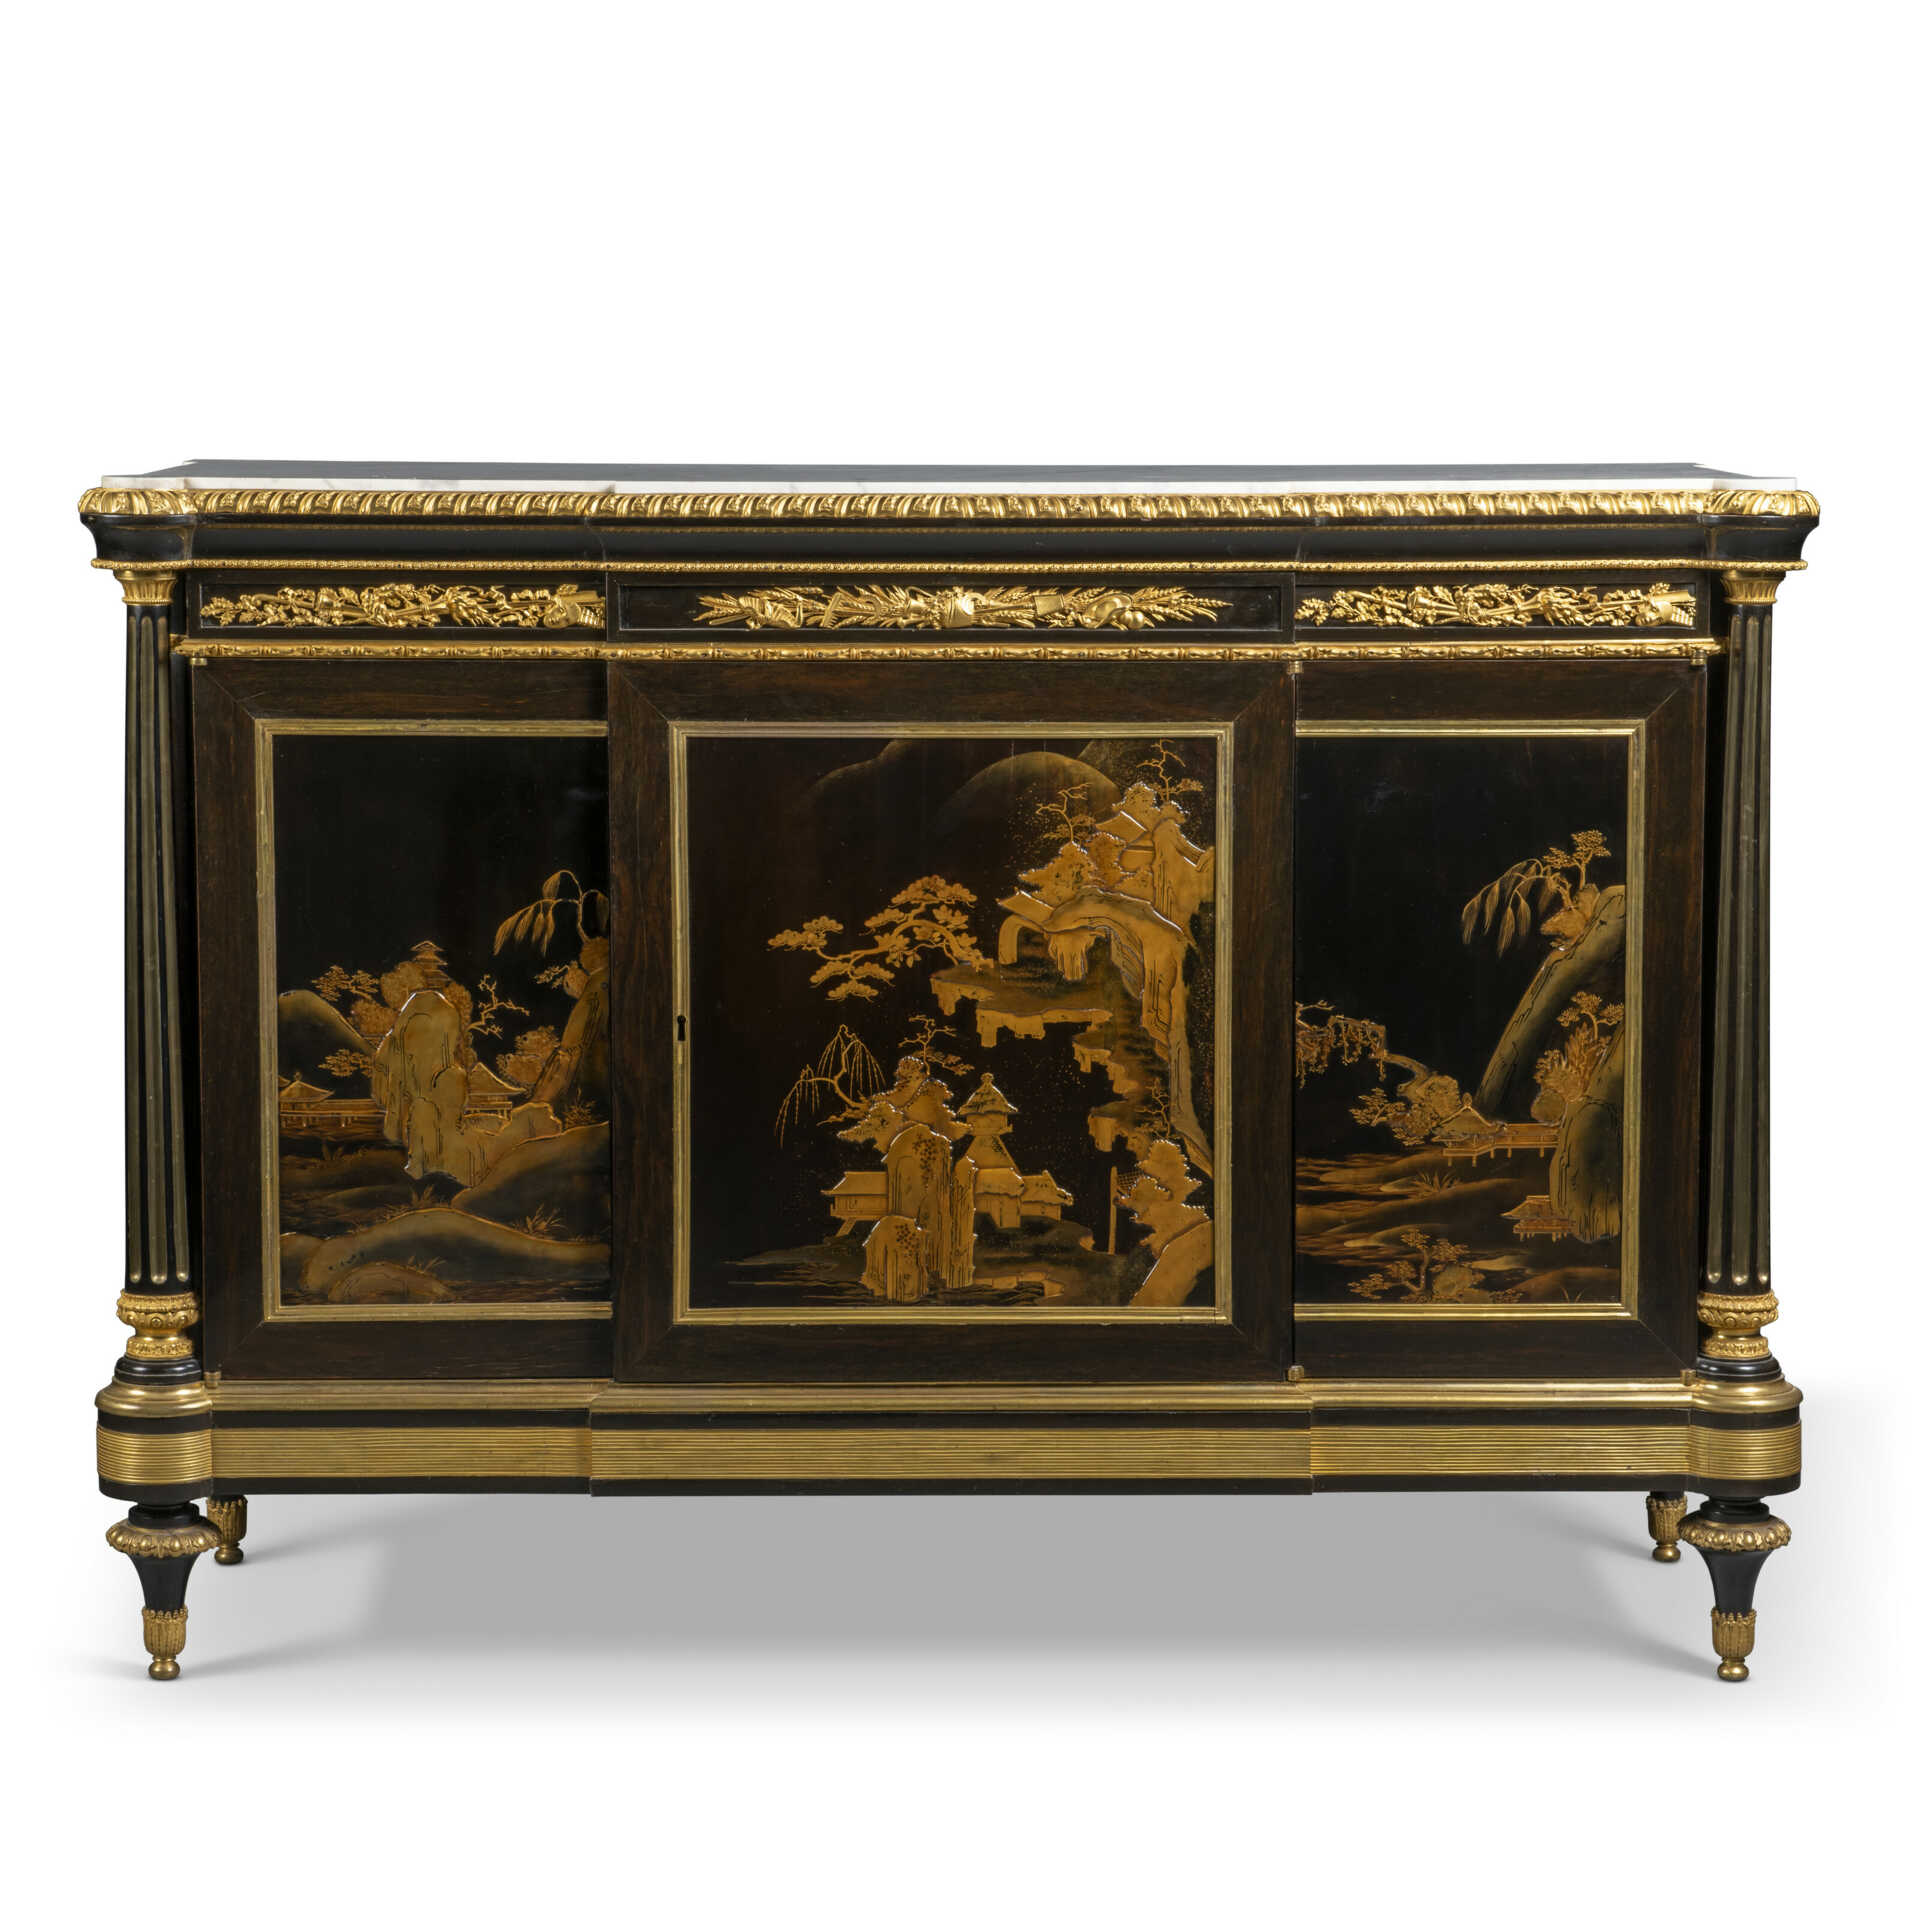 A LOUIS XVI ORMOLU-MOUNTED EBONY AND BLACK AND GILT LACQUER COMMODE A VANTAUX